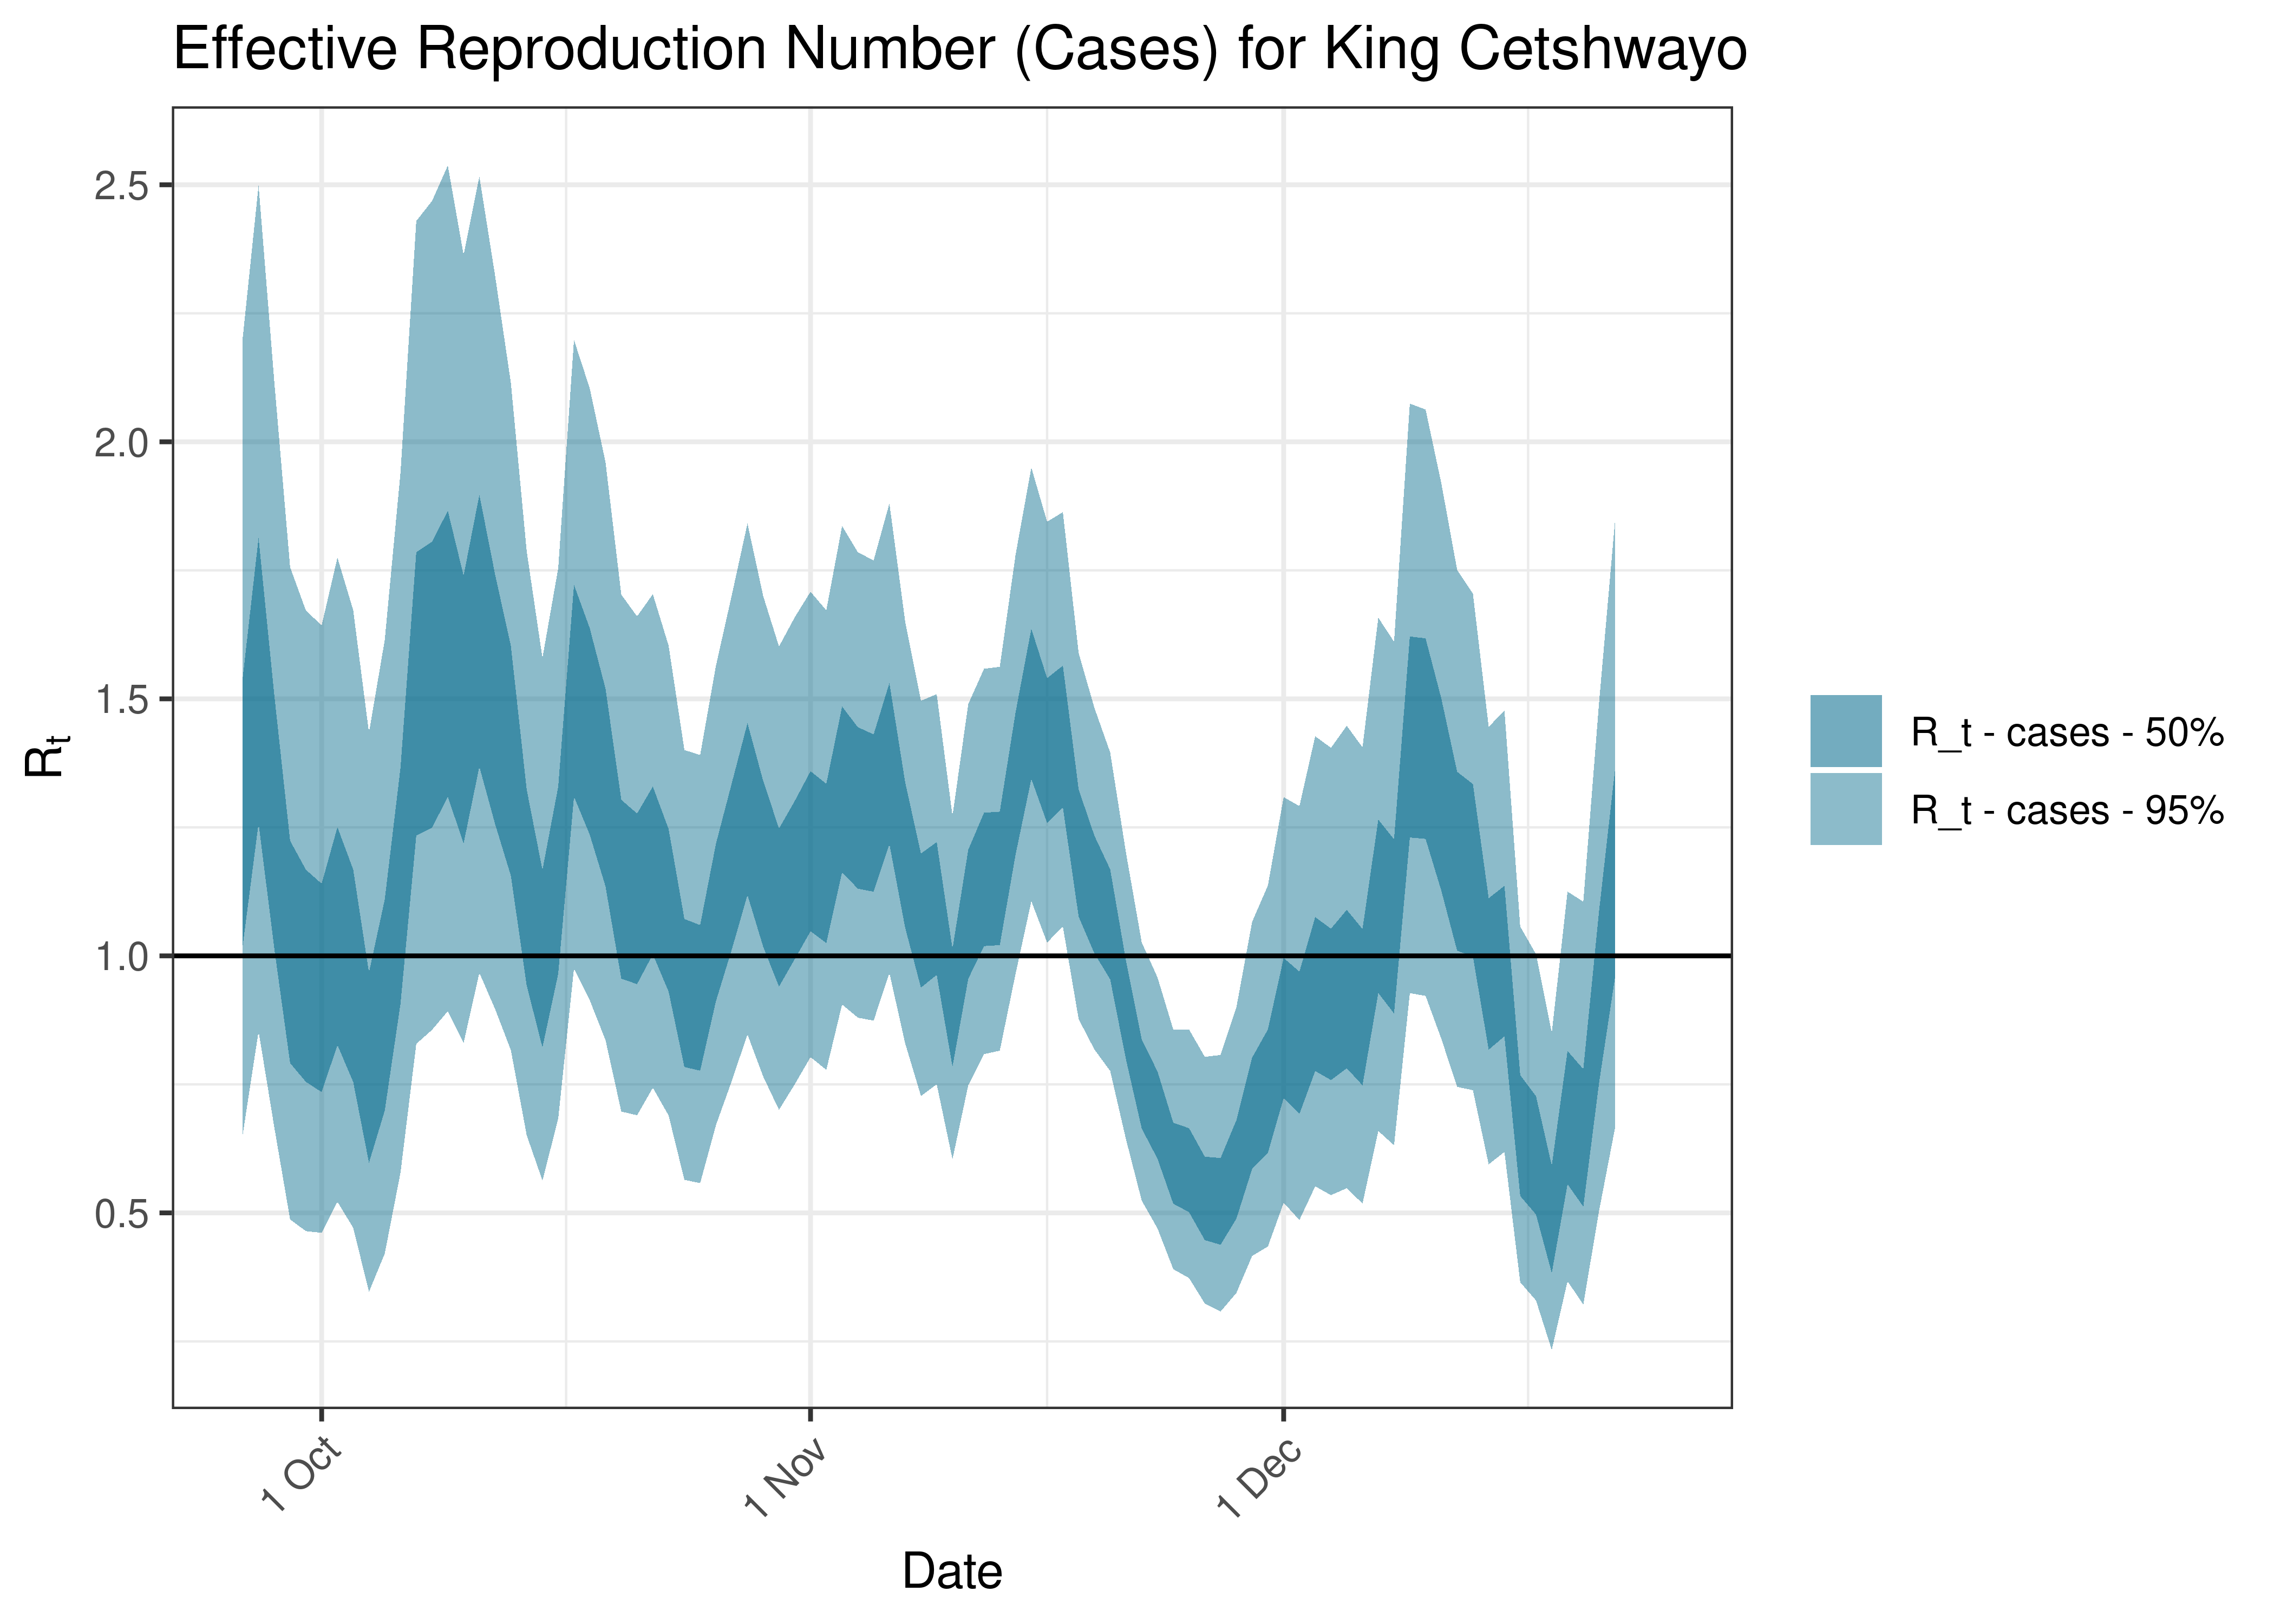 Estimated Effective Reproduction Number Based on Cases for King Cetshwayo over last 90 days